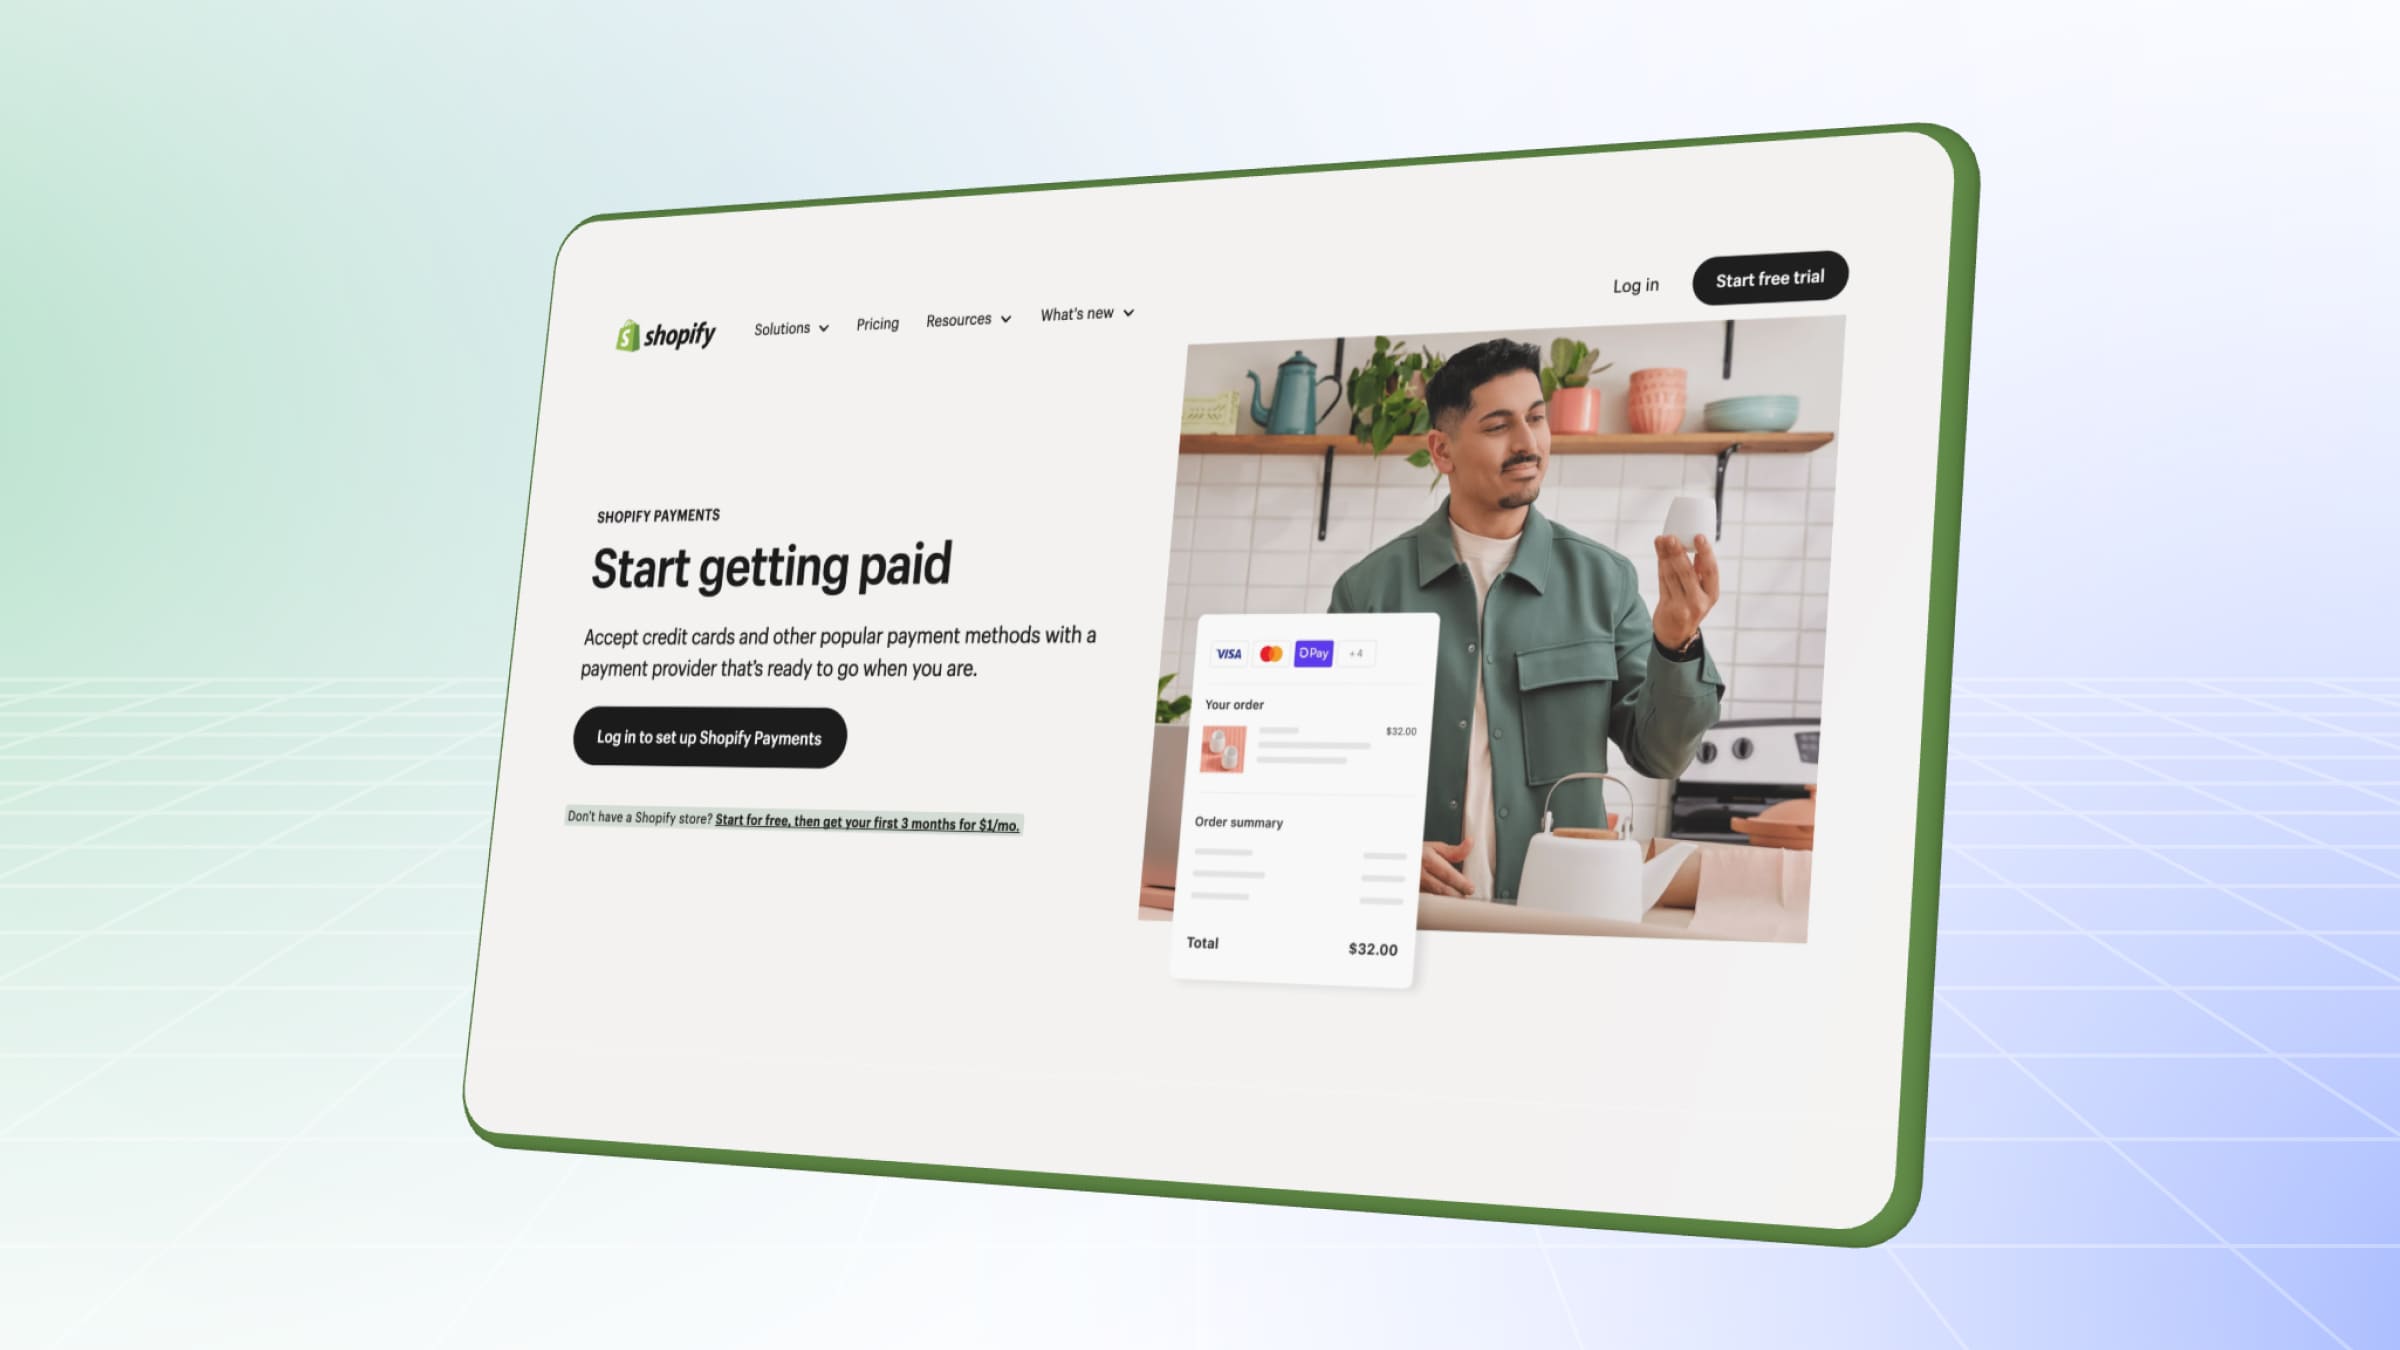 Shopify Payments is a payment system that you can easily connect to your online shop on Shopify.